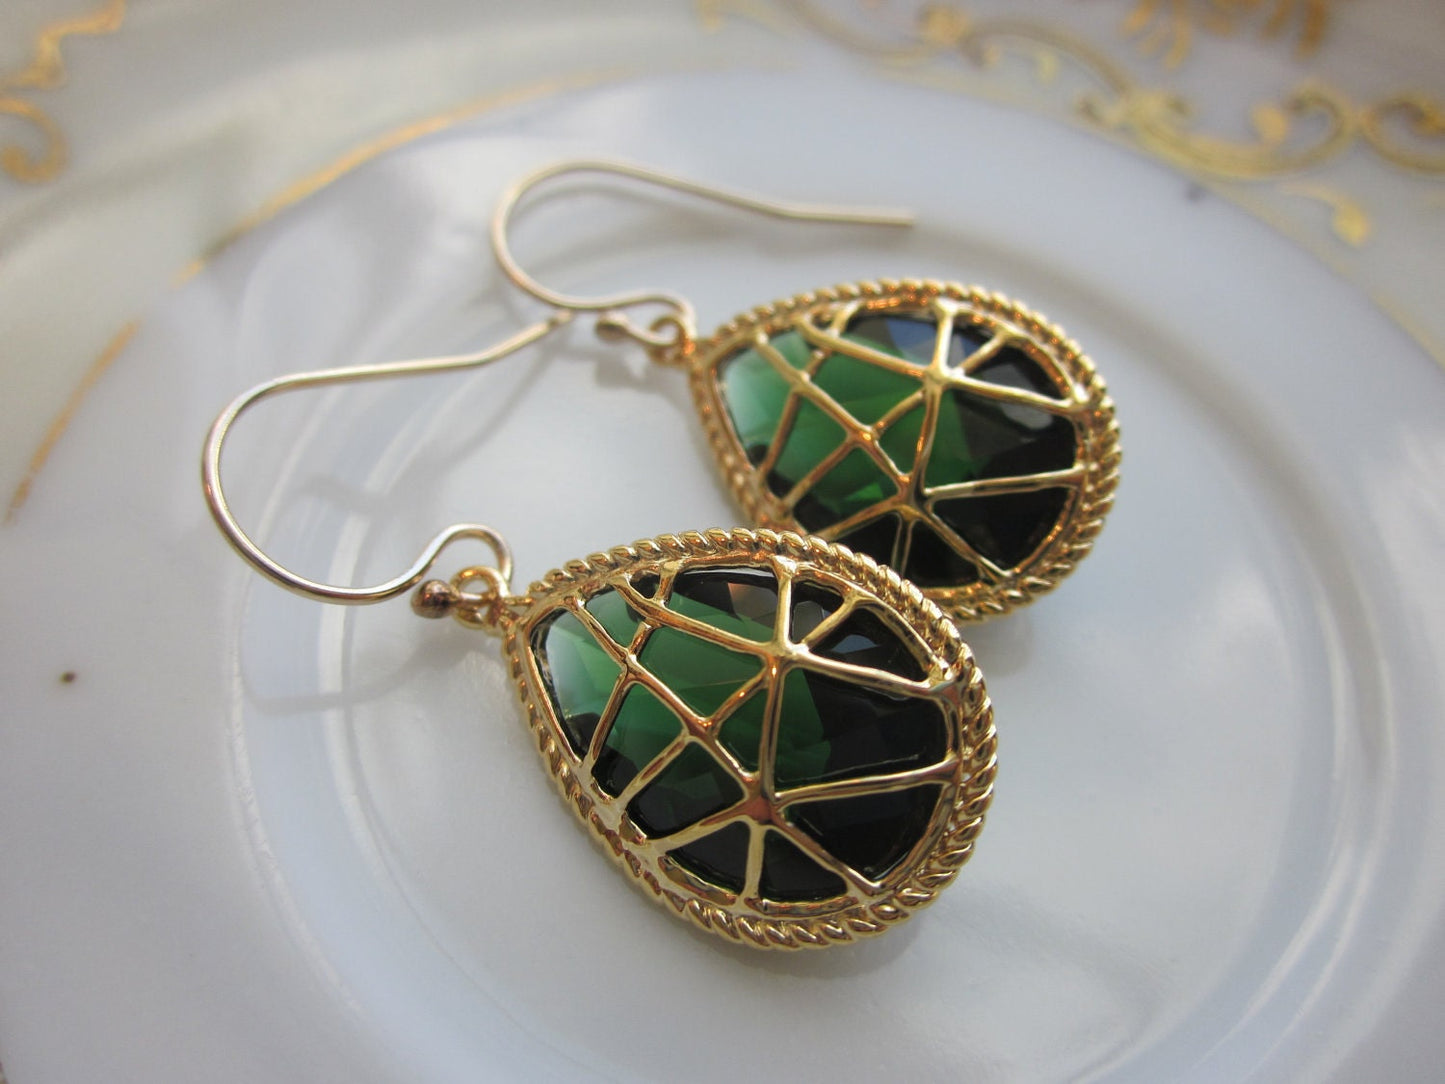 Emerald Green Earrings Gold Twisted - Bridesmaid Earrings - Bridal Earrings - Wedding Earrings